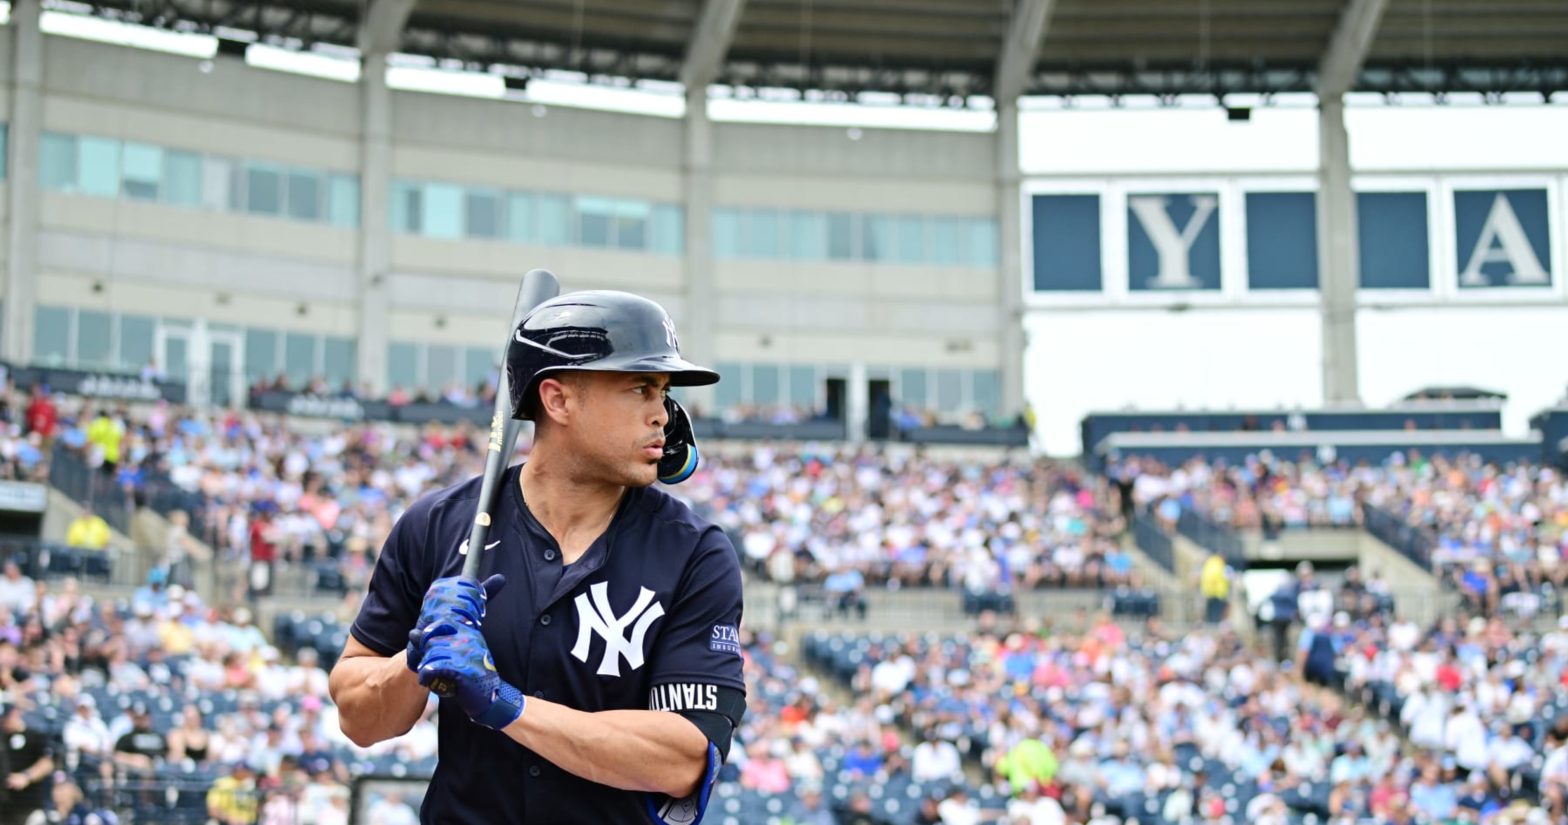 Yankees’ Giancarlo Stanton Wows MLB Fans with 3 HRs, 8 RBI in Spring Game vs. Pirates